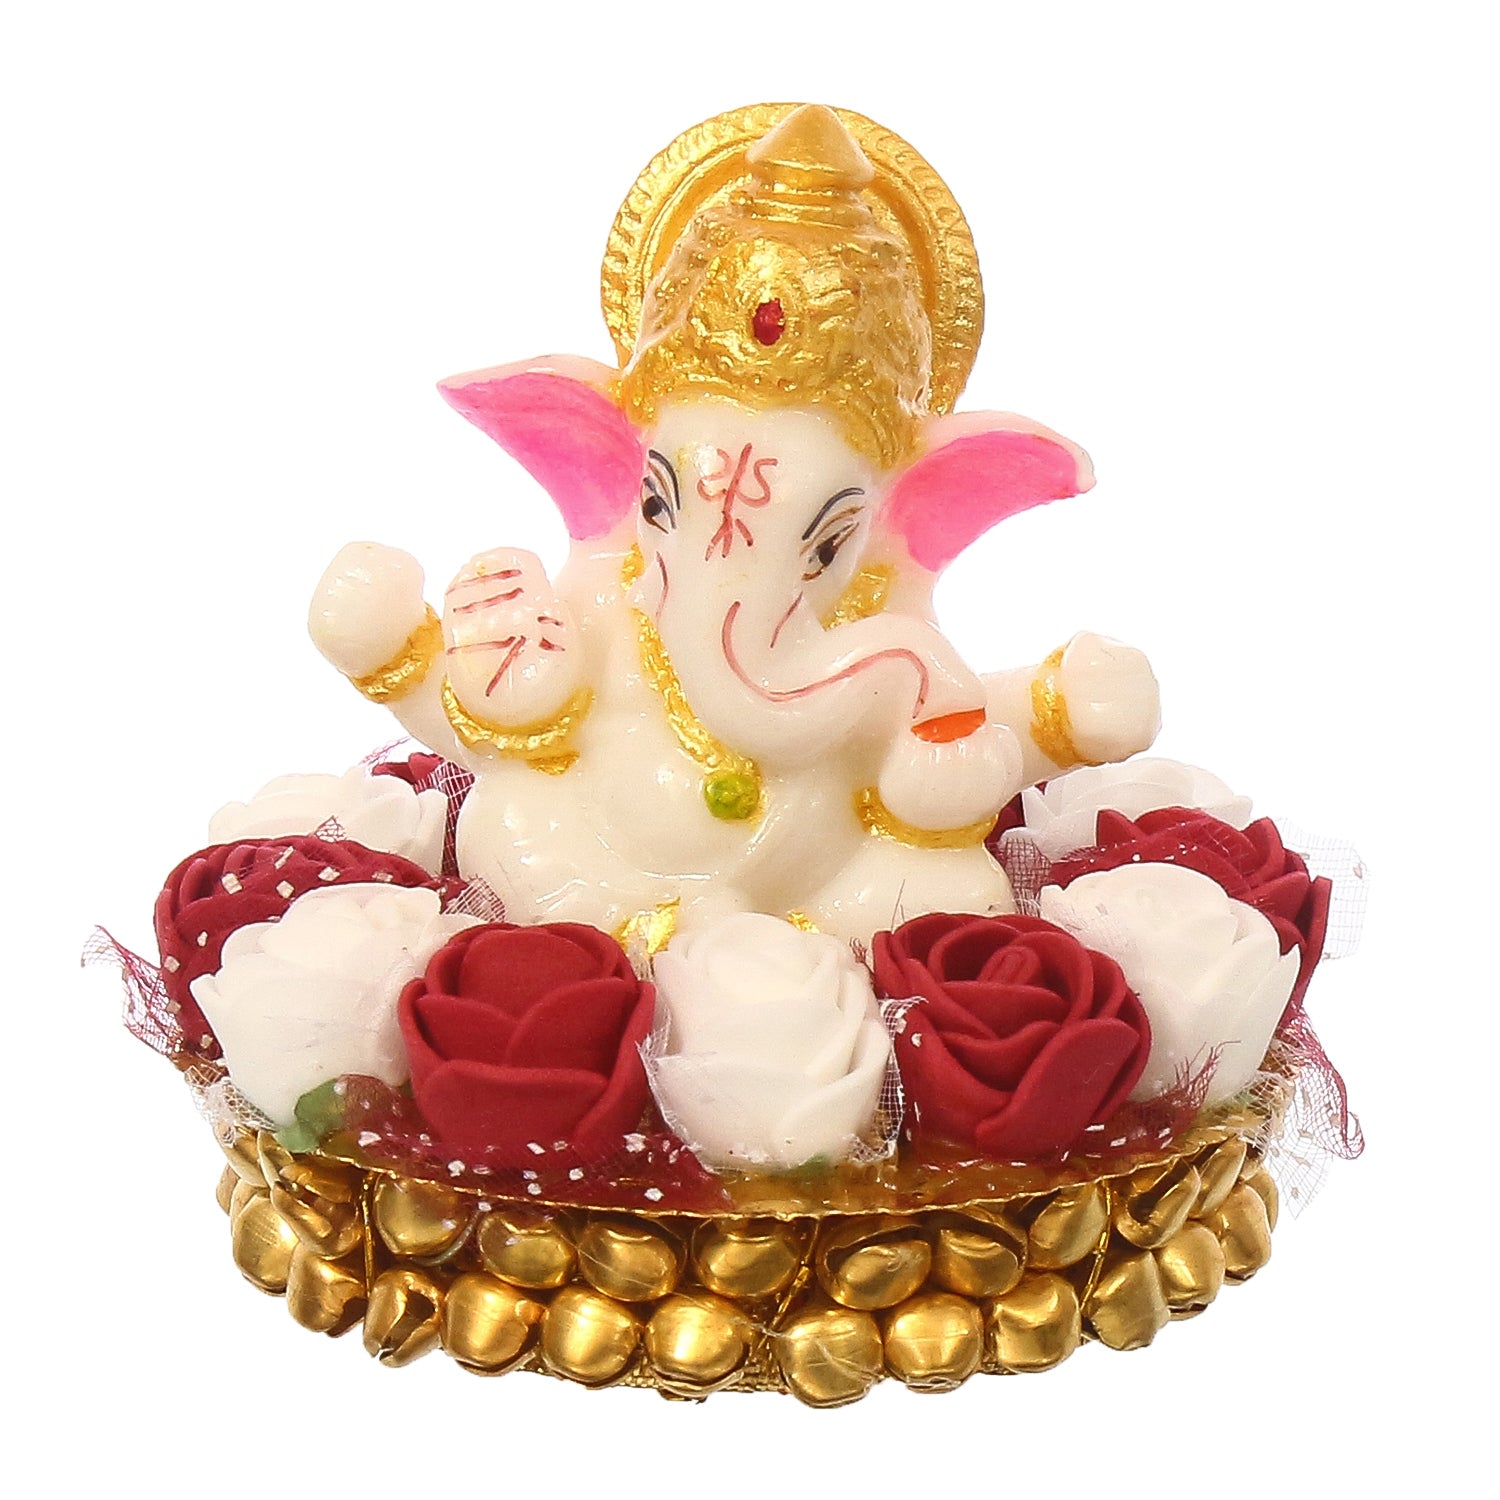 Golden and White Polyresin Lord Ganesha Idol on Decorative Handcrafted Plate with Red and White Flowers 2